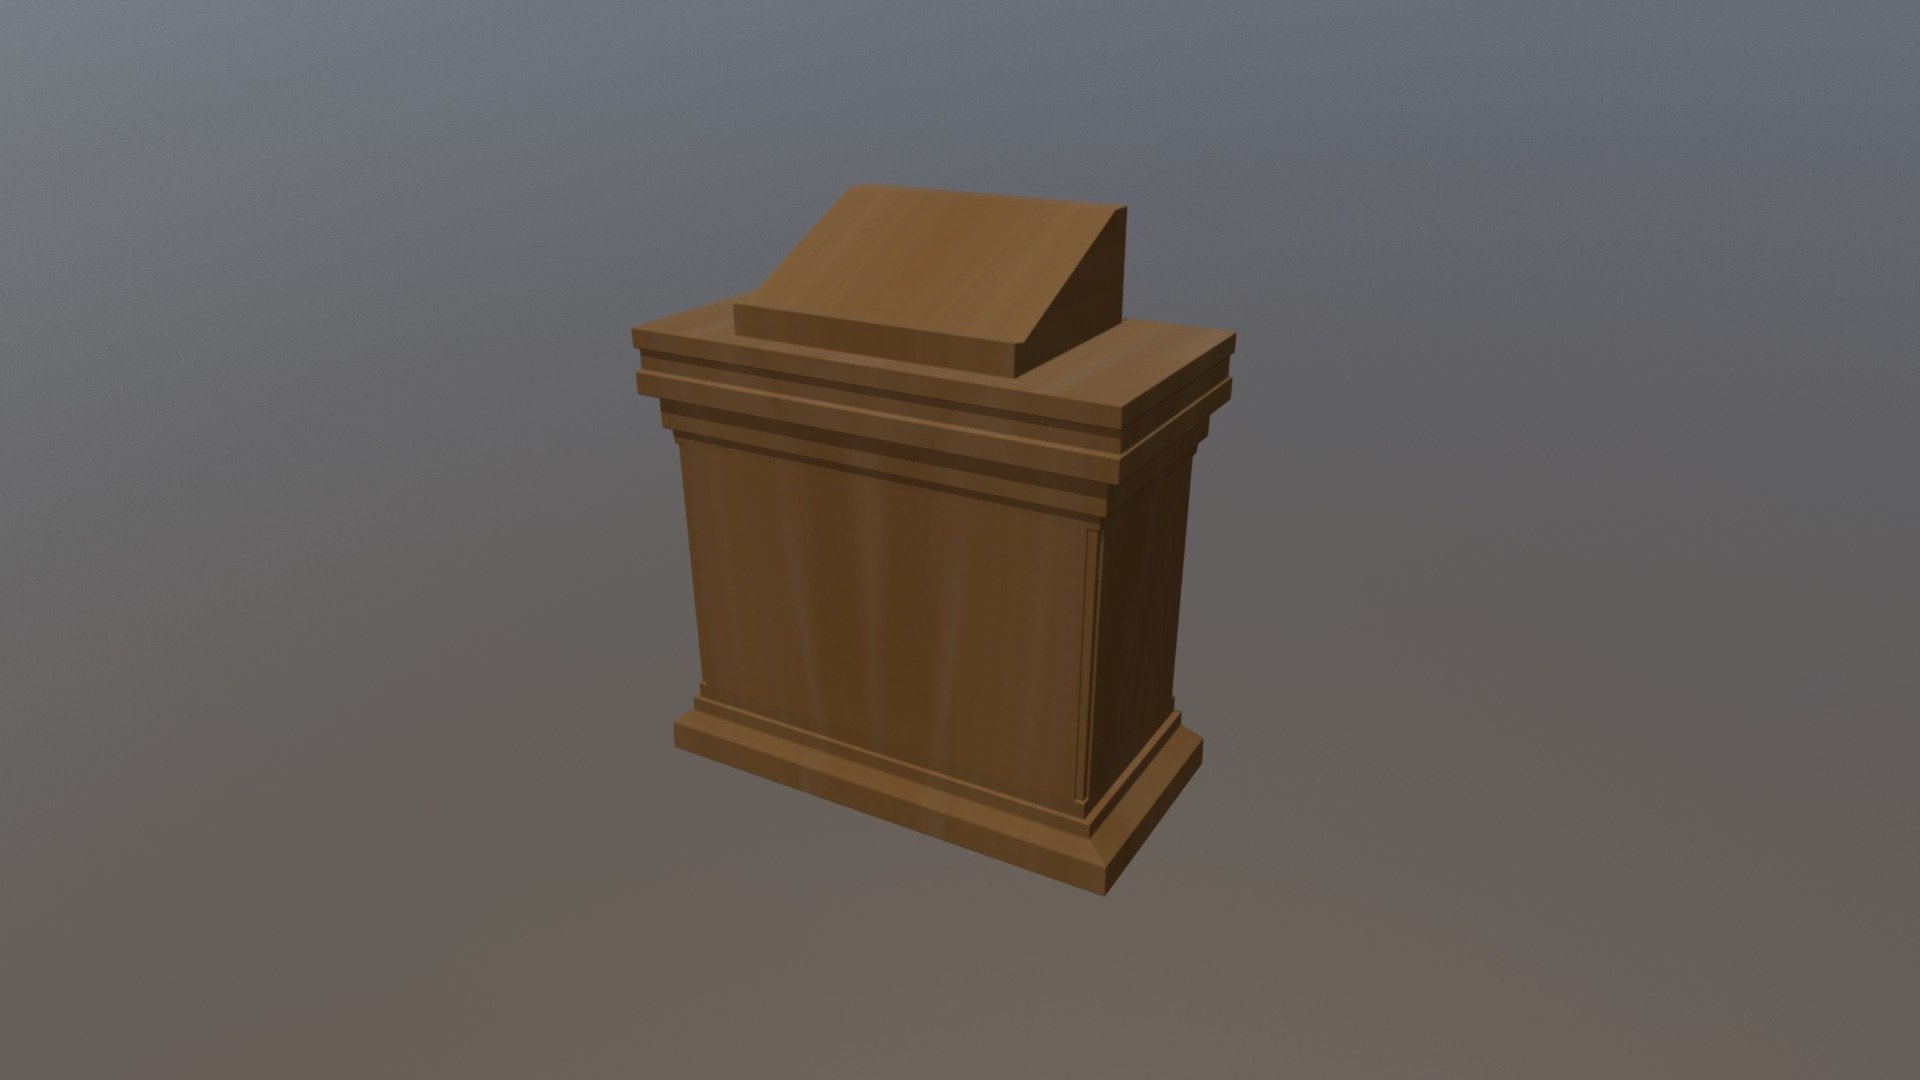 This is a podium for the church asset pack. It was made using Blender 3d model